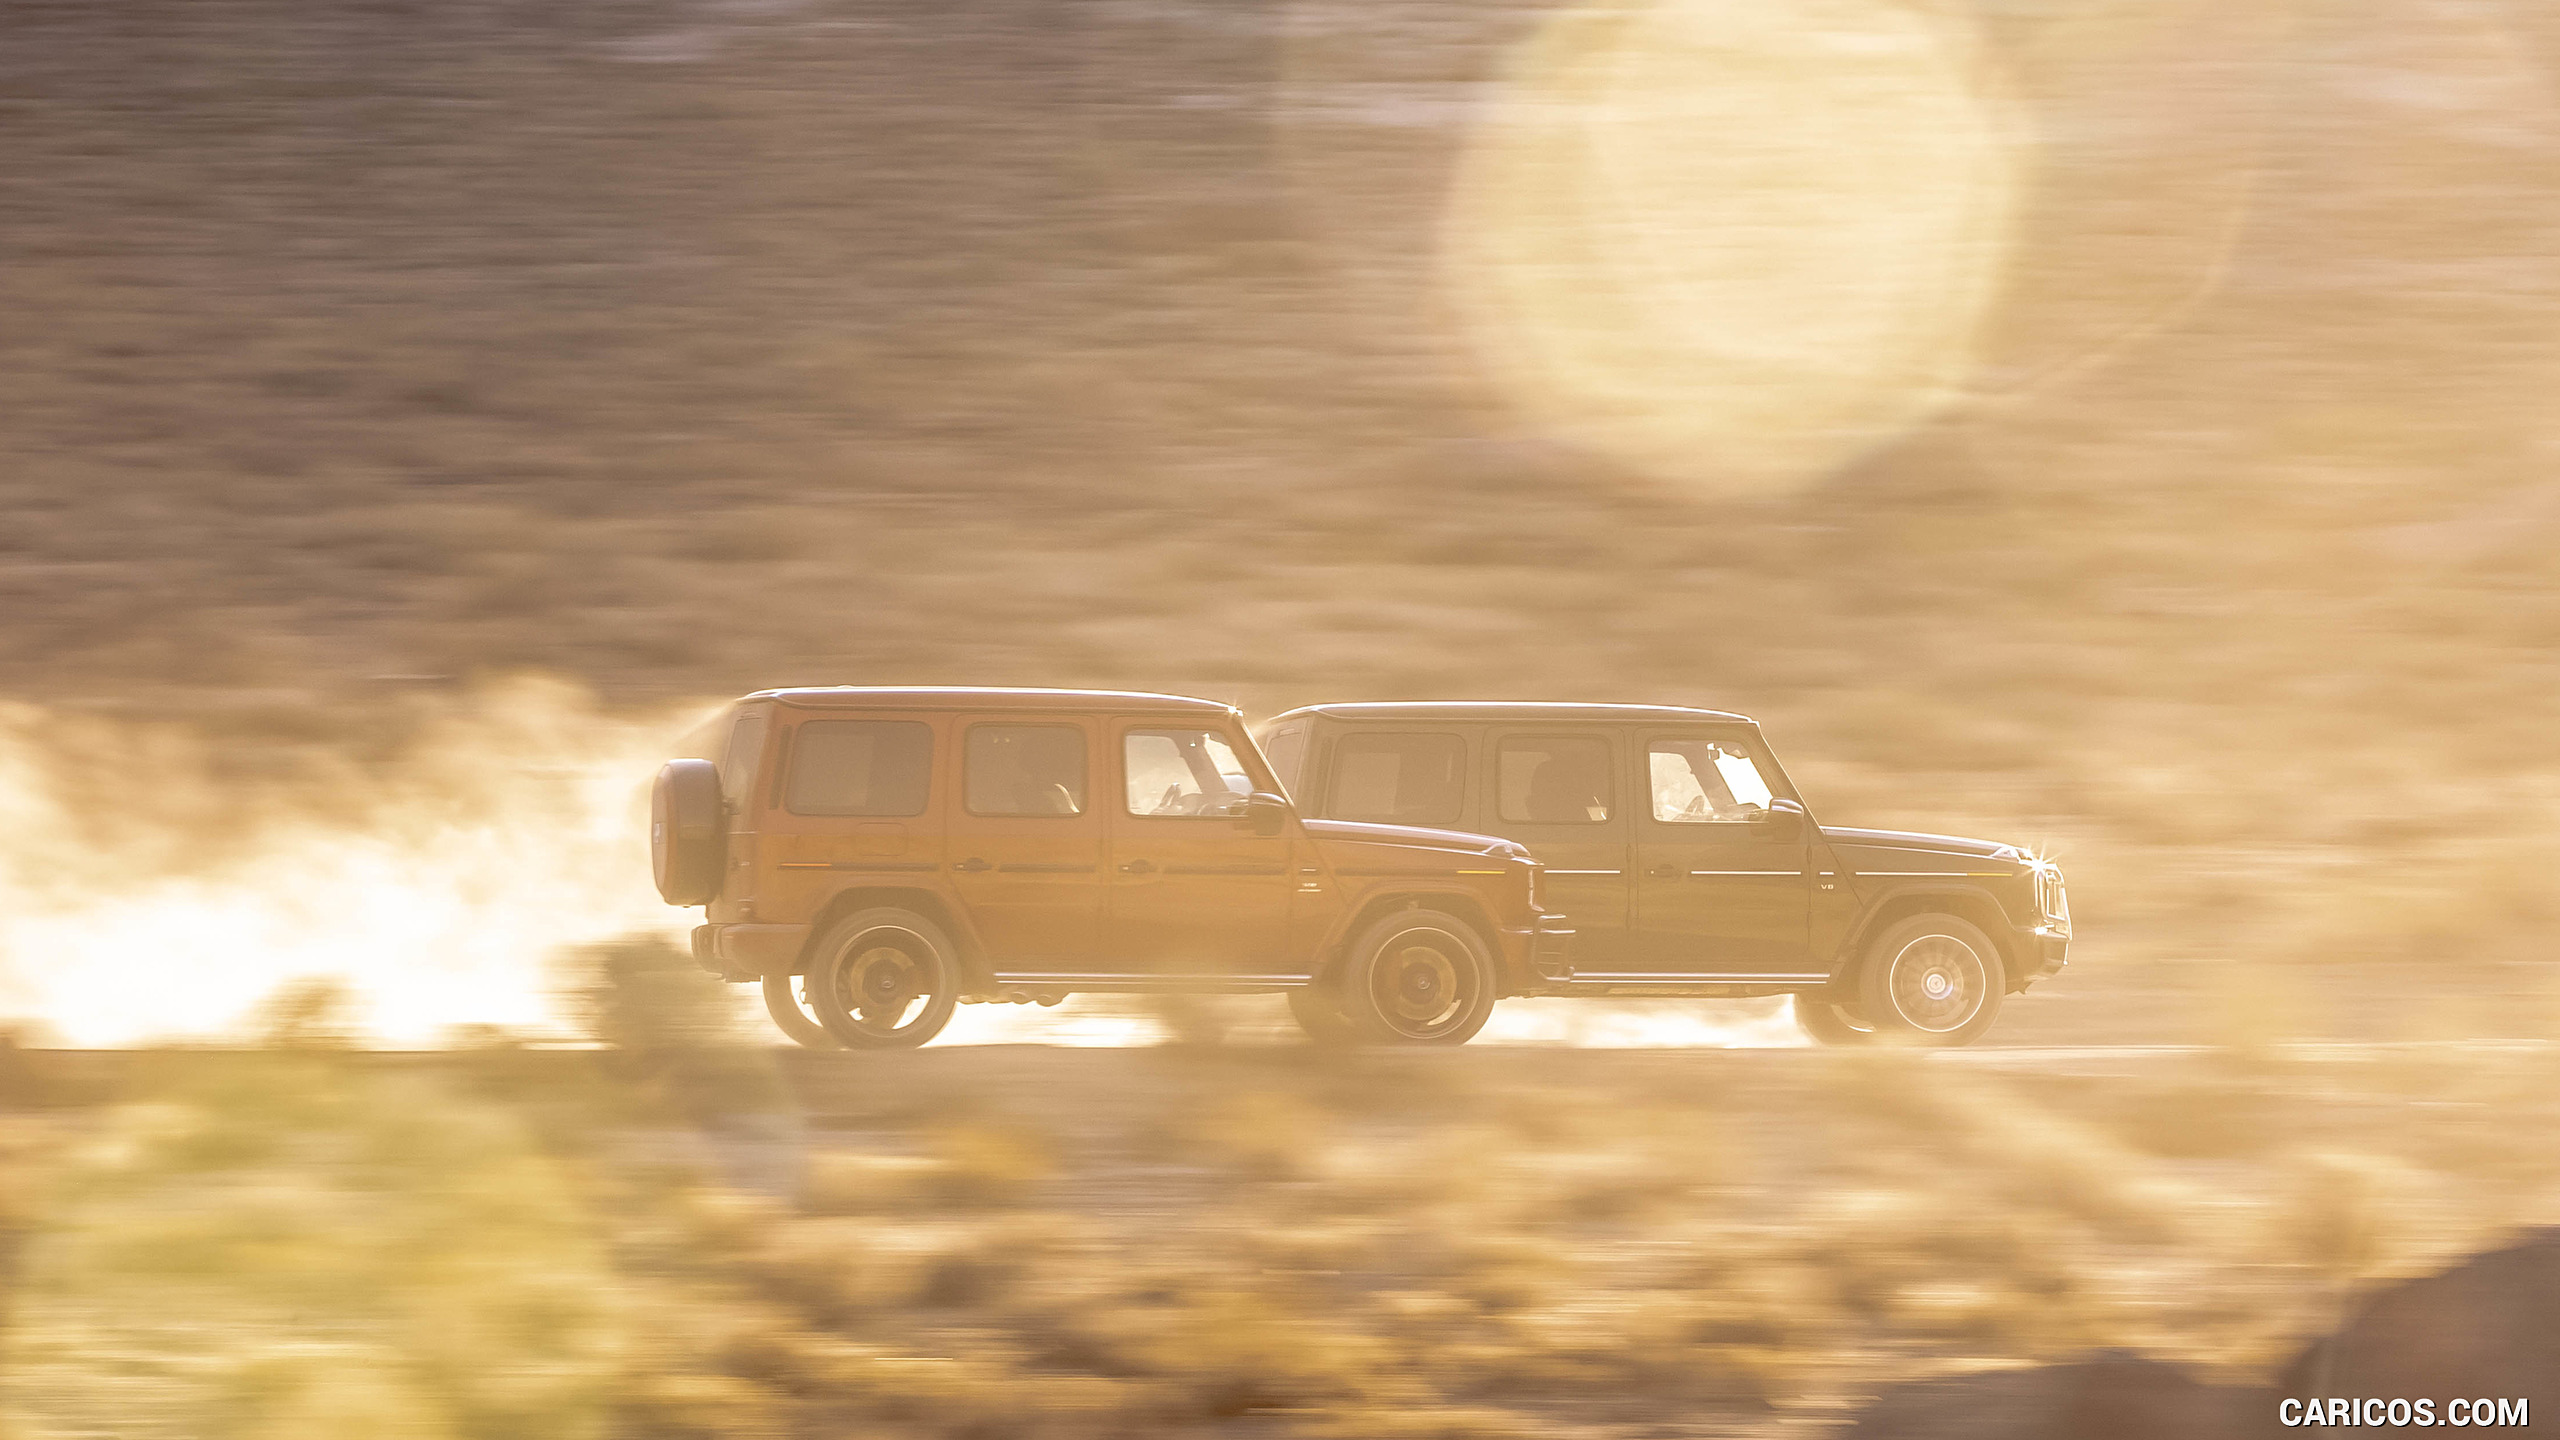 2019 Mercedes-AMG G63 (U.S.-Spec) and 2019 G550, #360 of 452